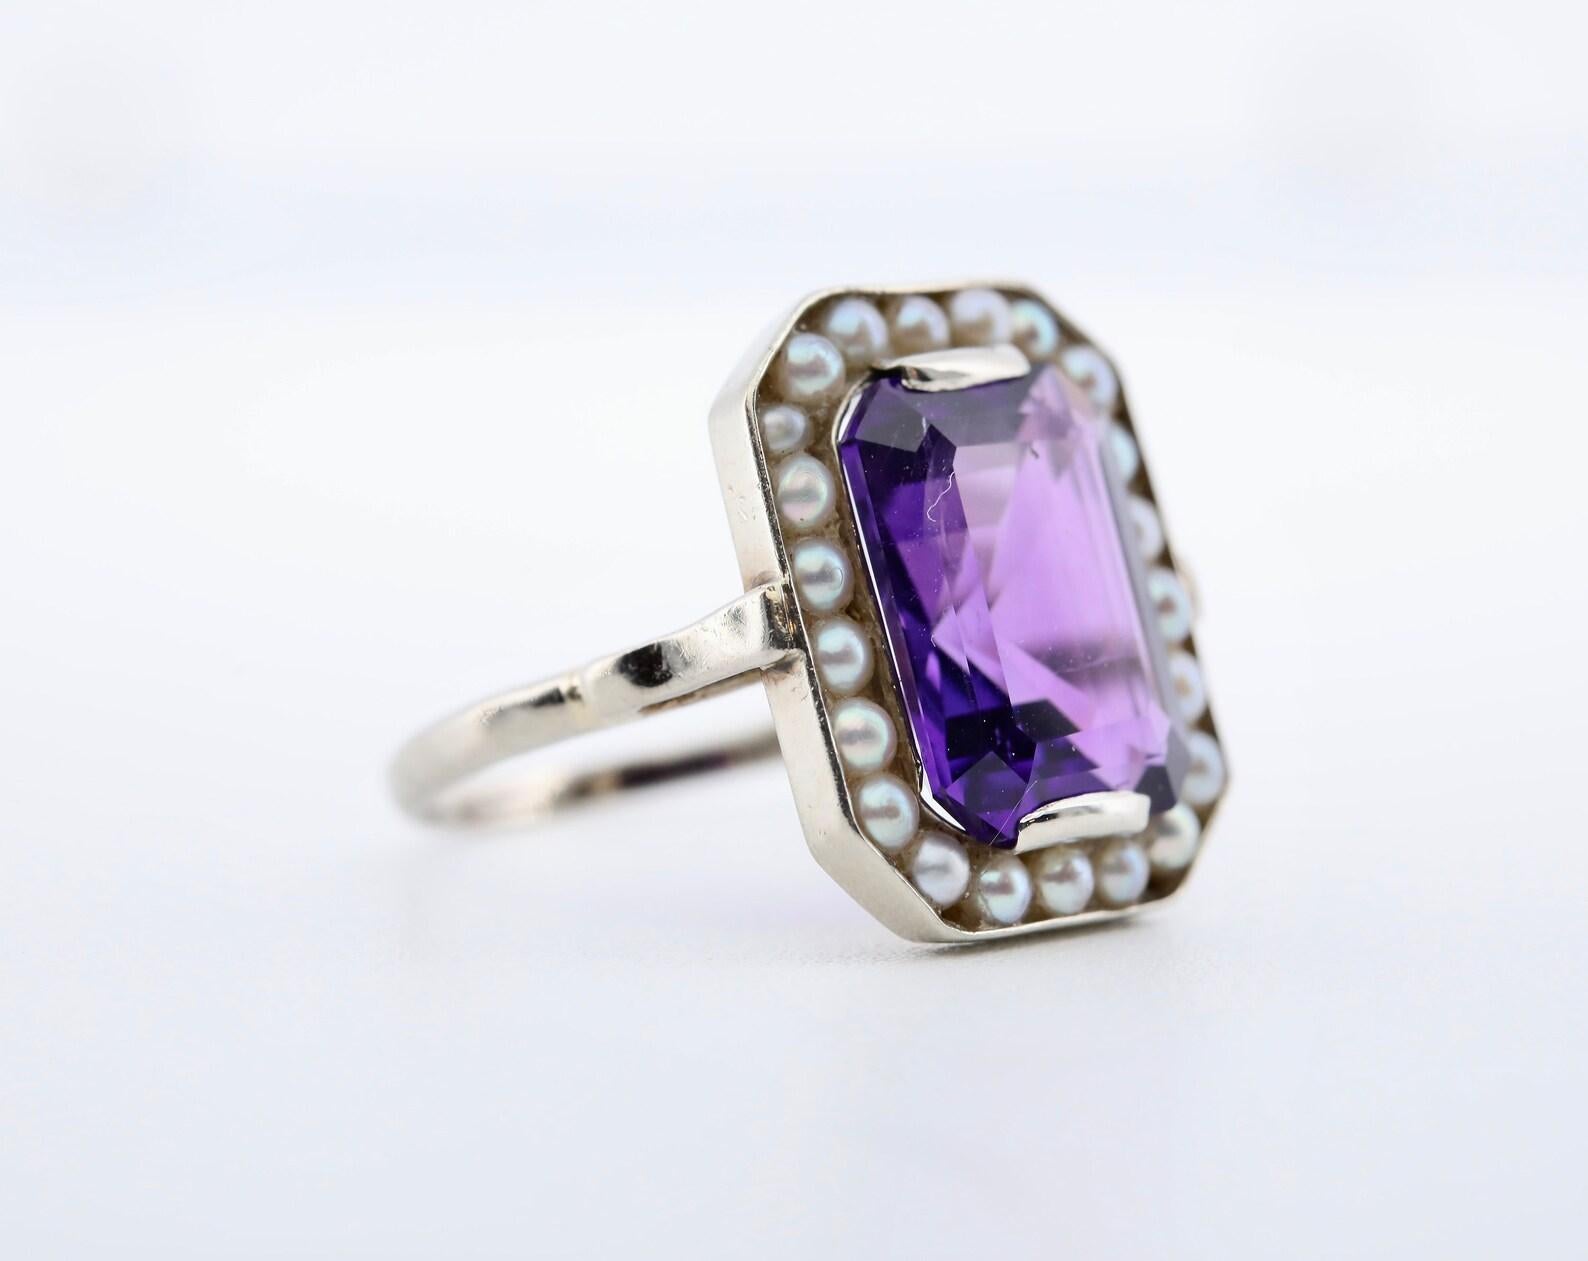 A handmade Art Deco period natural pearl and amethyst halo style ring.

Centered by a vivid purple amethyst measuring 12mm by 9mm, and weighing approximately 5 carats.

Encircled by a halo of natural cream colored saltwater pearls measuring 2.5mm